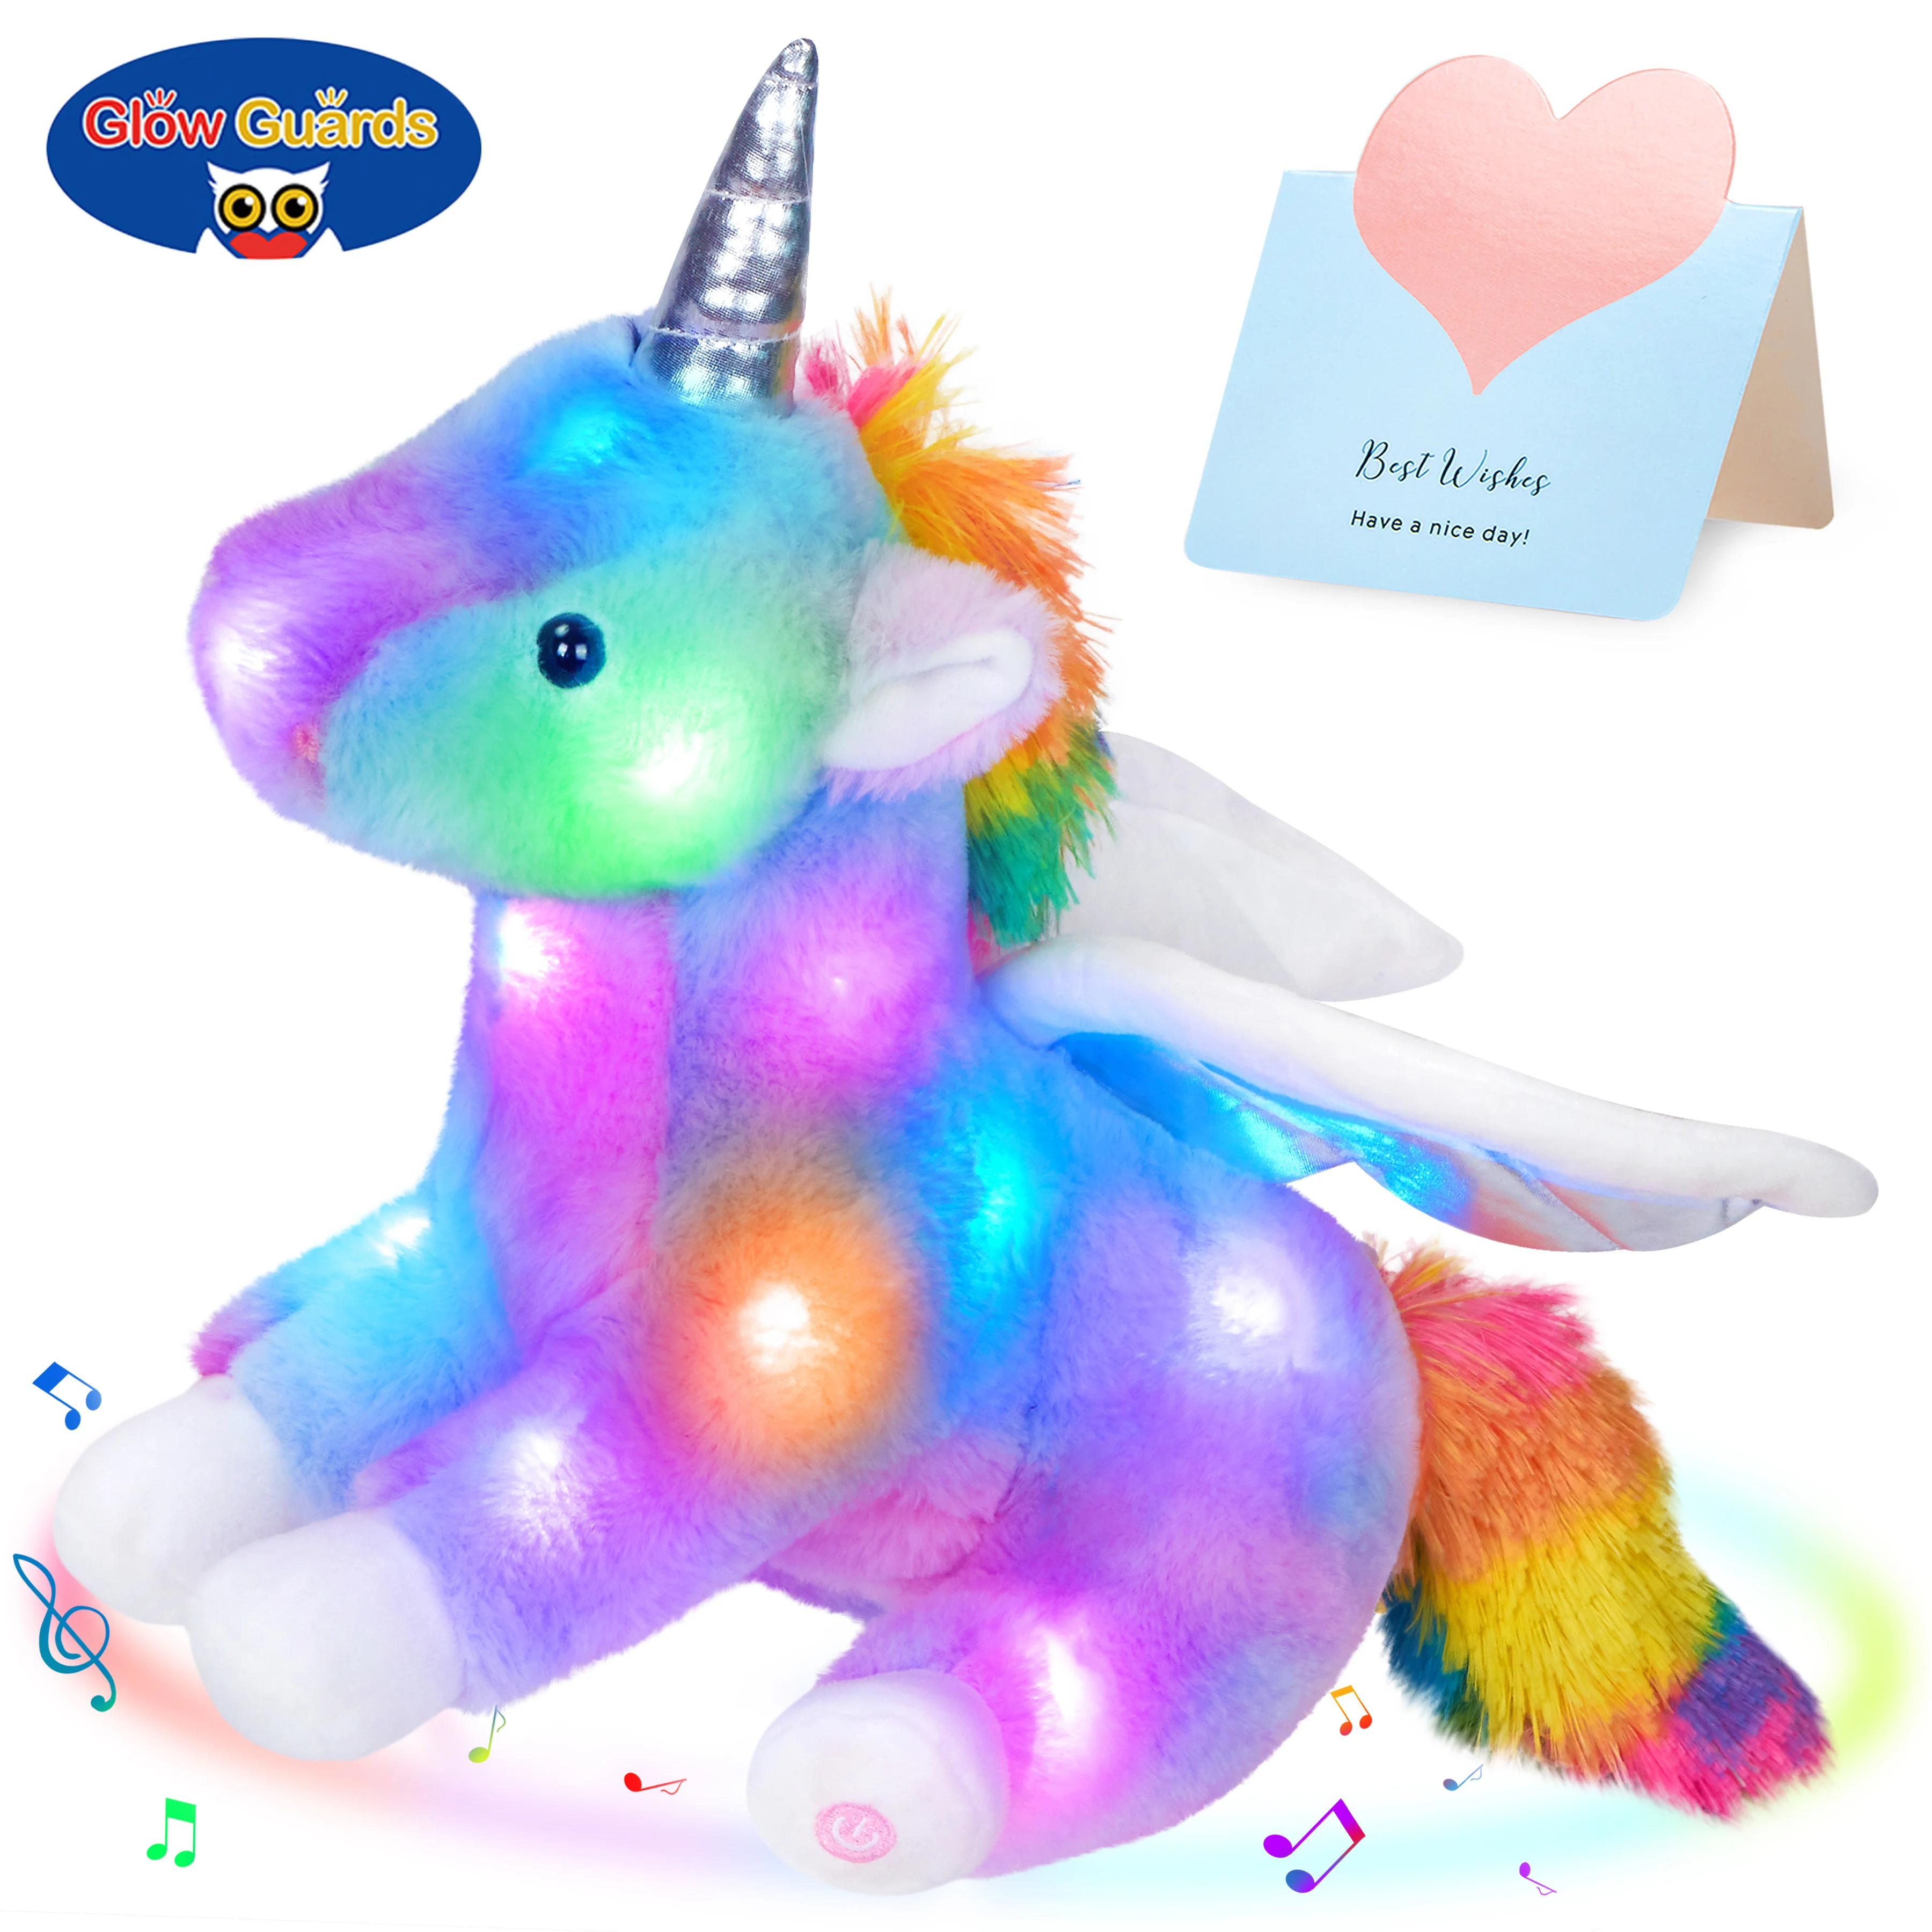 

Glow Guards Led Luminous Music Toy Throw Pillow Rainbow Unicorn Hair Toy for Children's Night Light Up Cute Girl Throw Pillow